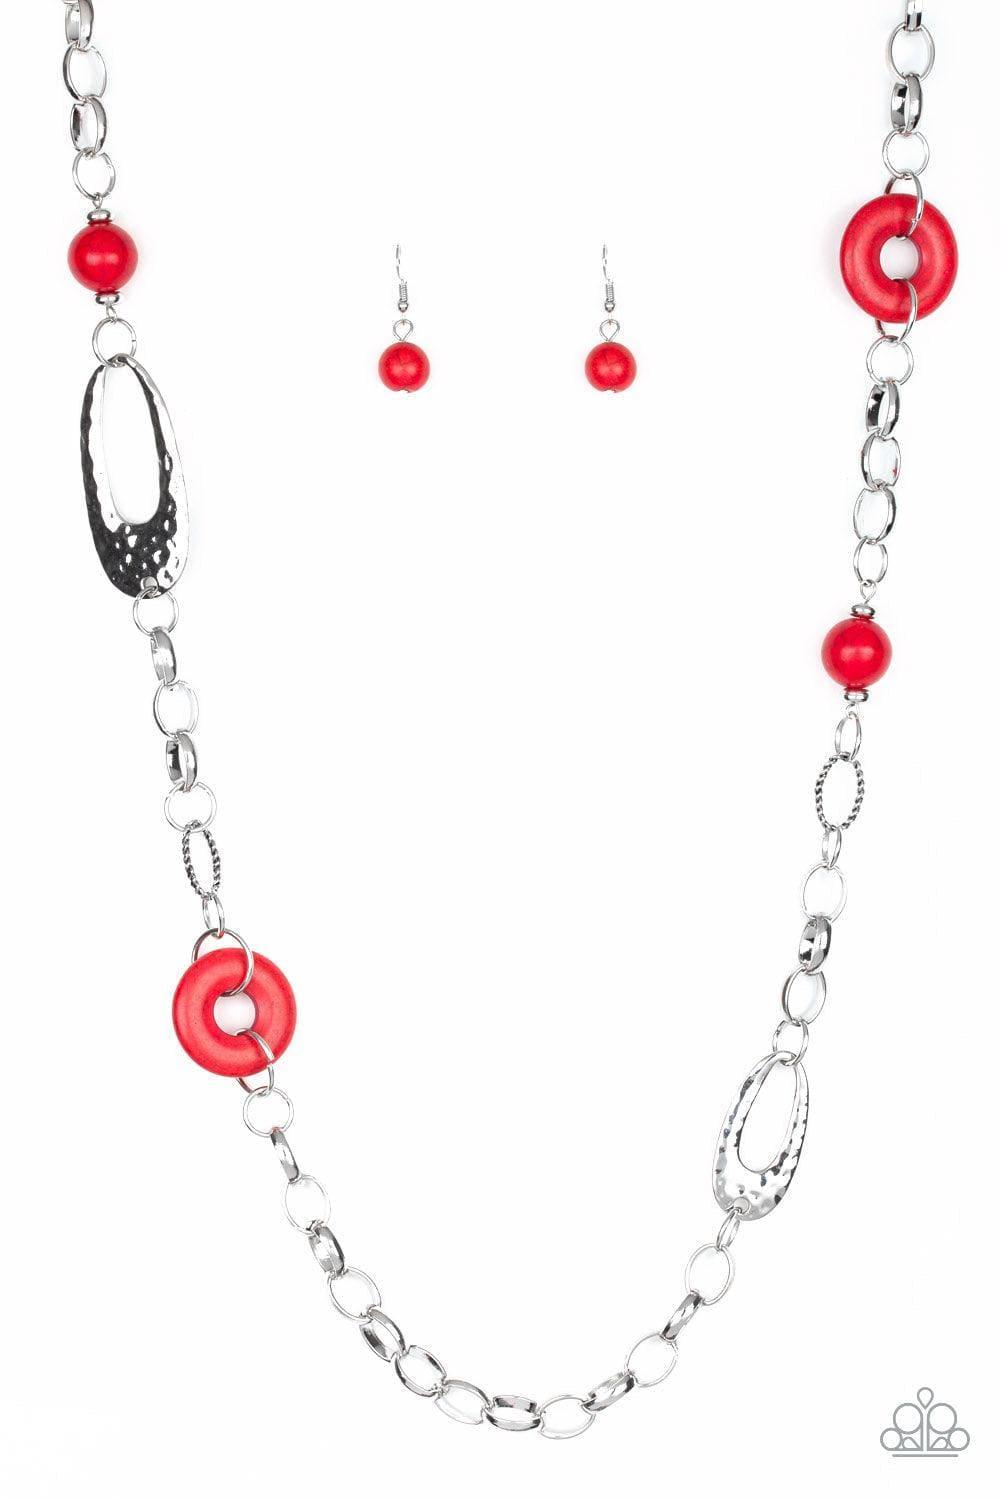 Paparazzi Accessories - Artisan Artifact - Red Necklace - Bling by JessieK